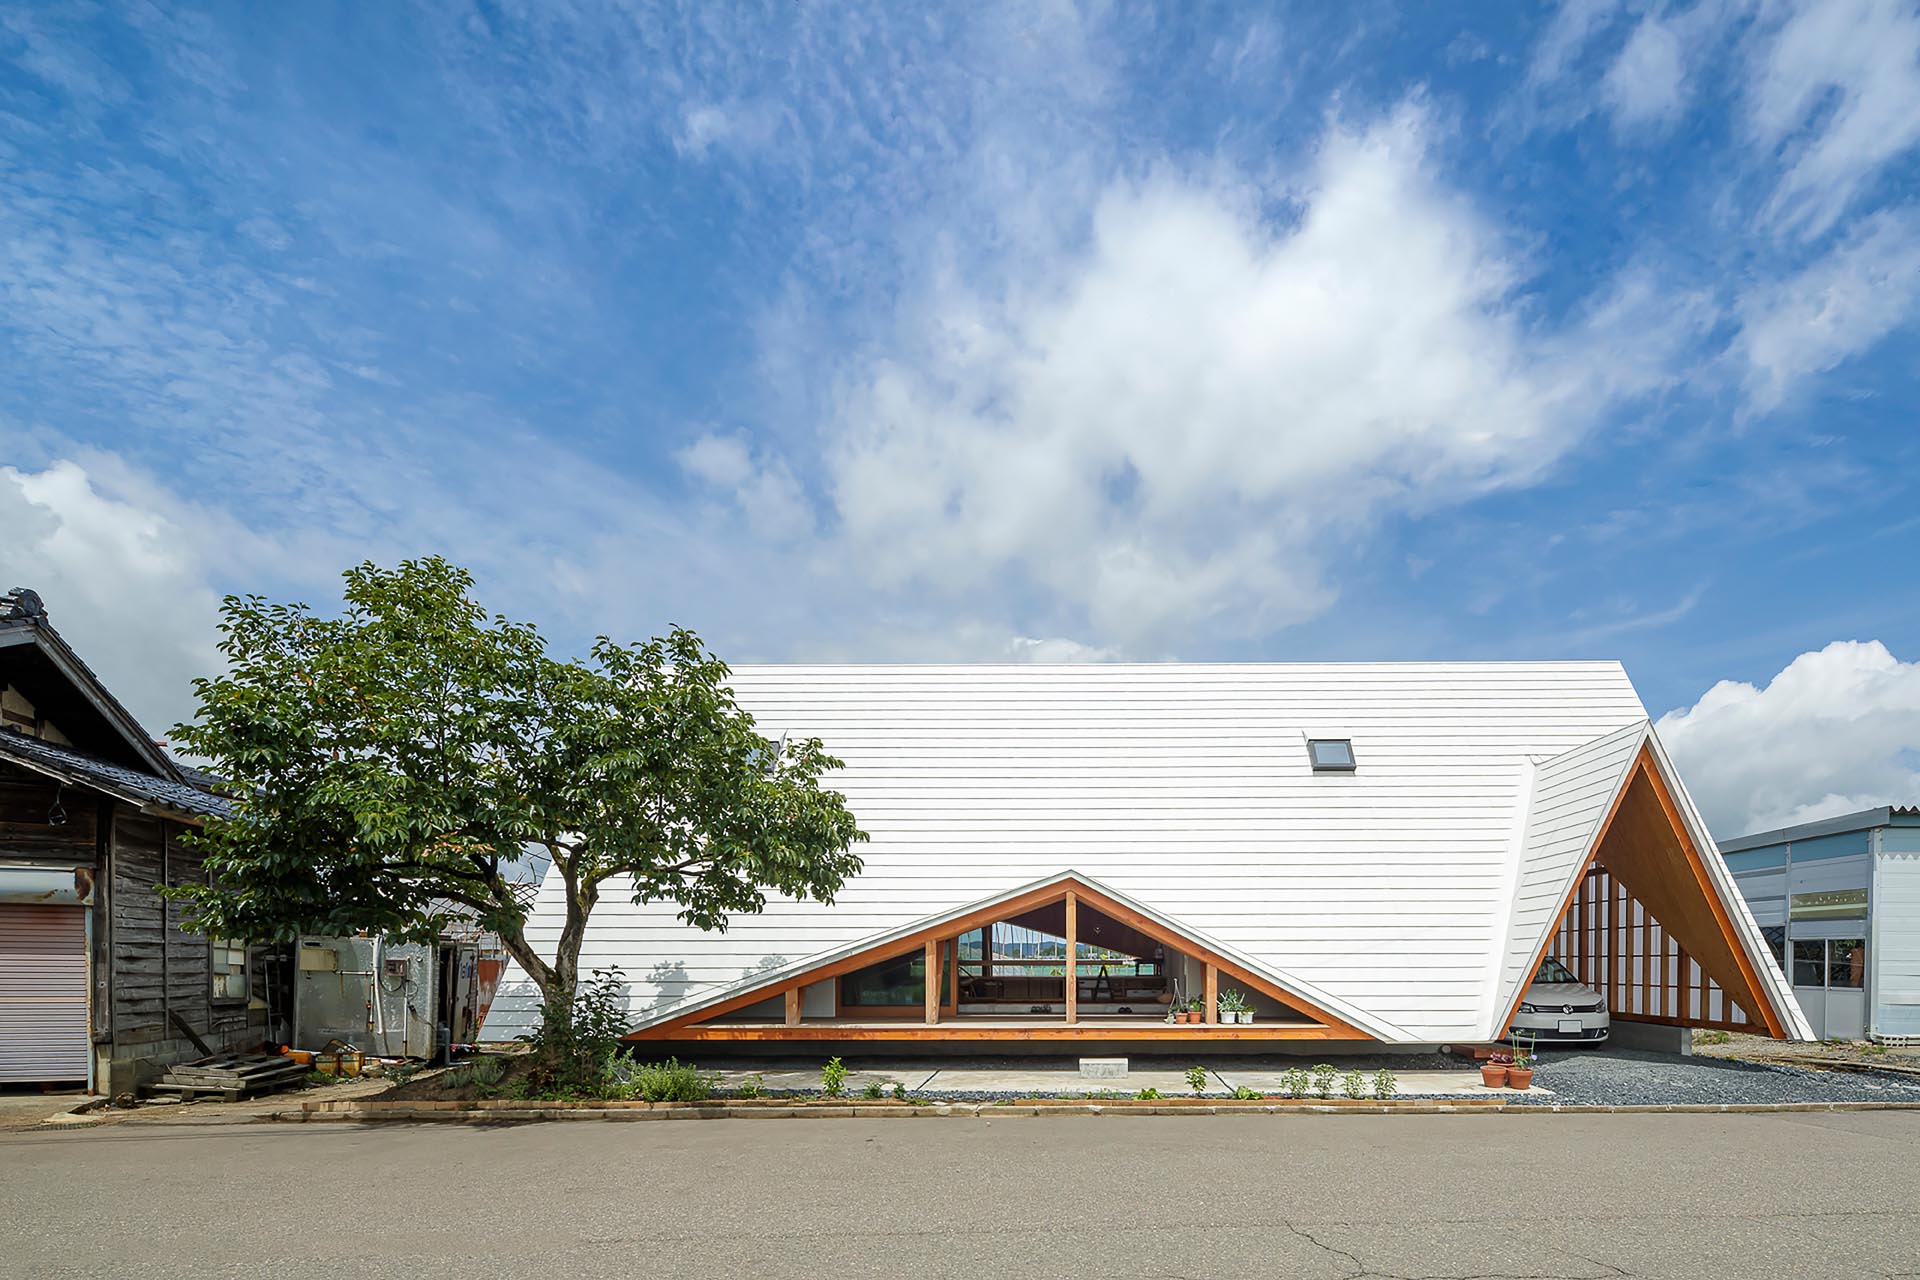 Takeru Shoji Architects Co. has recently completed a new A-frame home in Niigata, Japan, that draws inspiration from the many vinyl greenhouses and work sheds in the surrounding area.